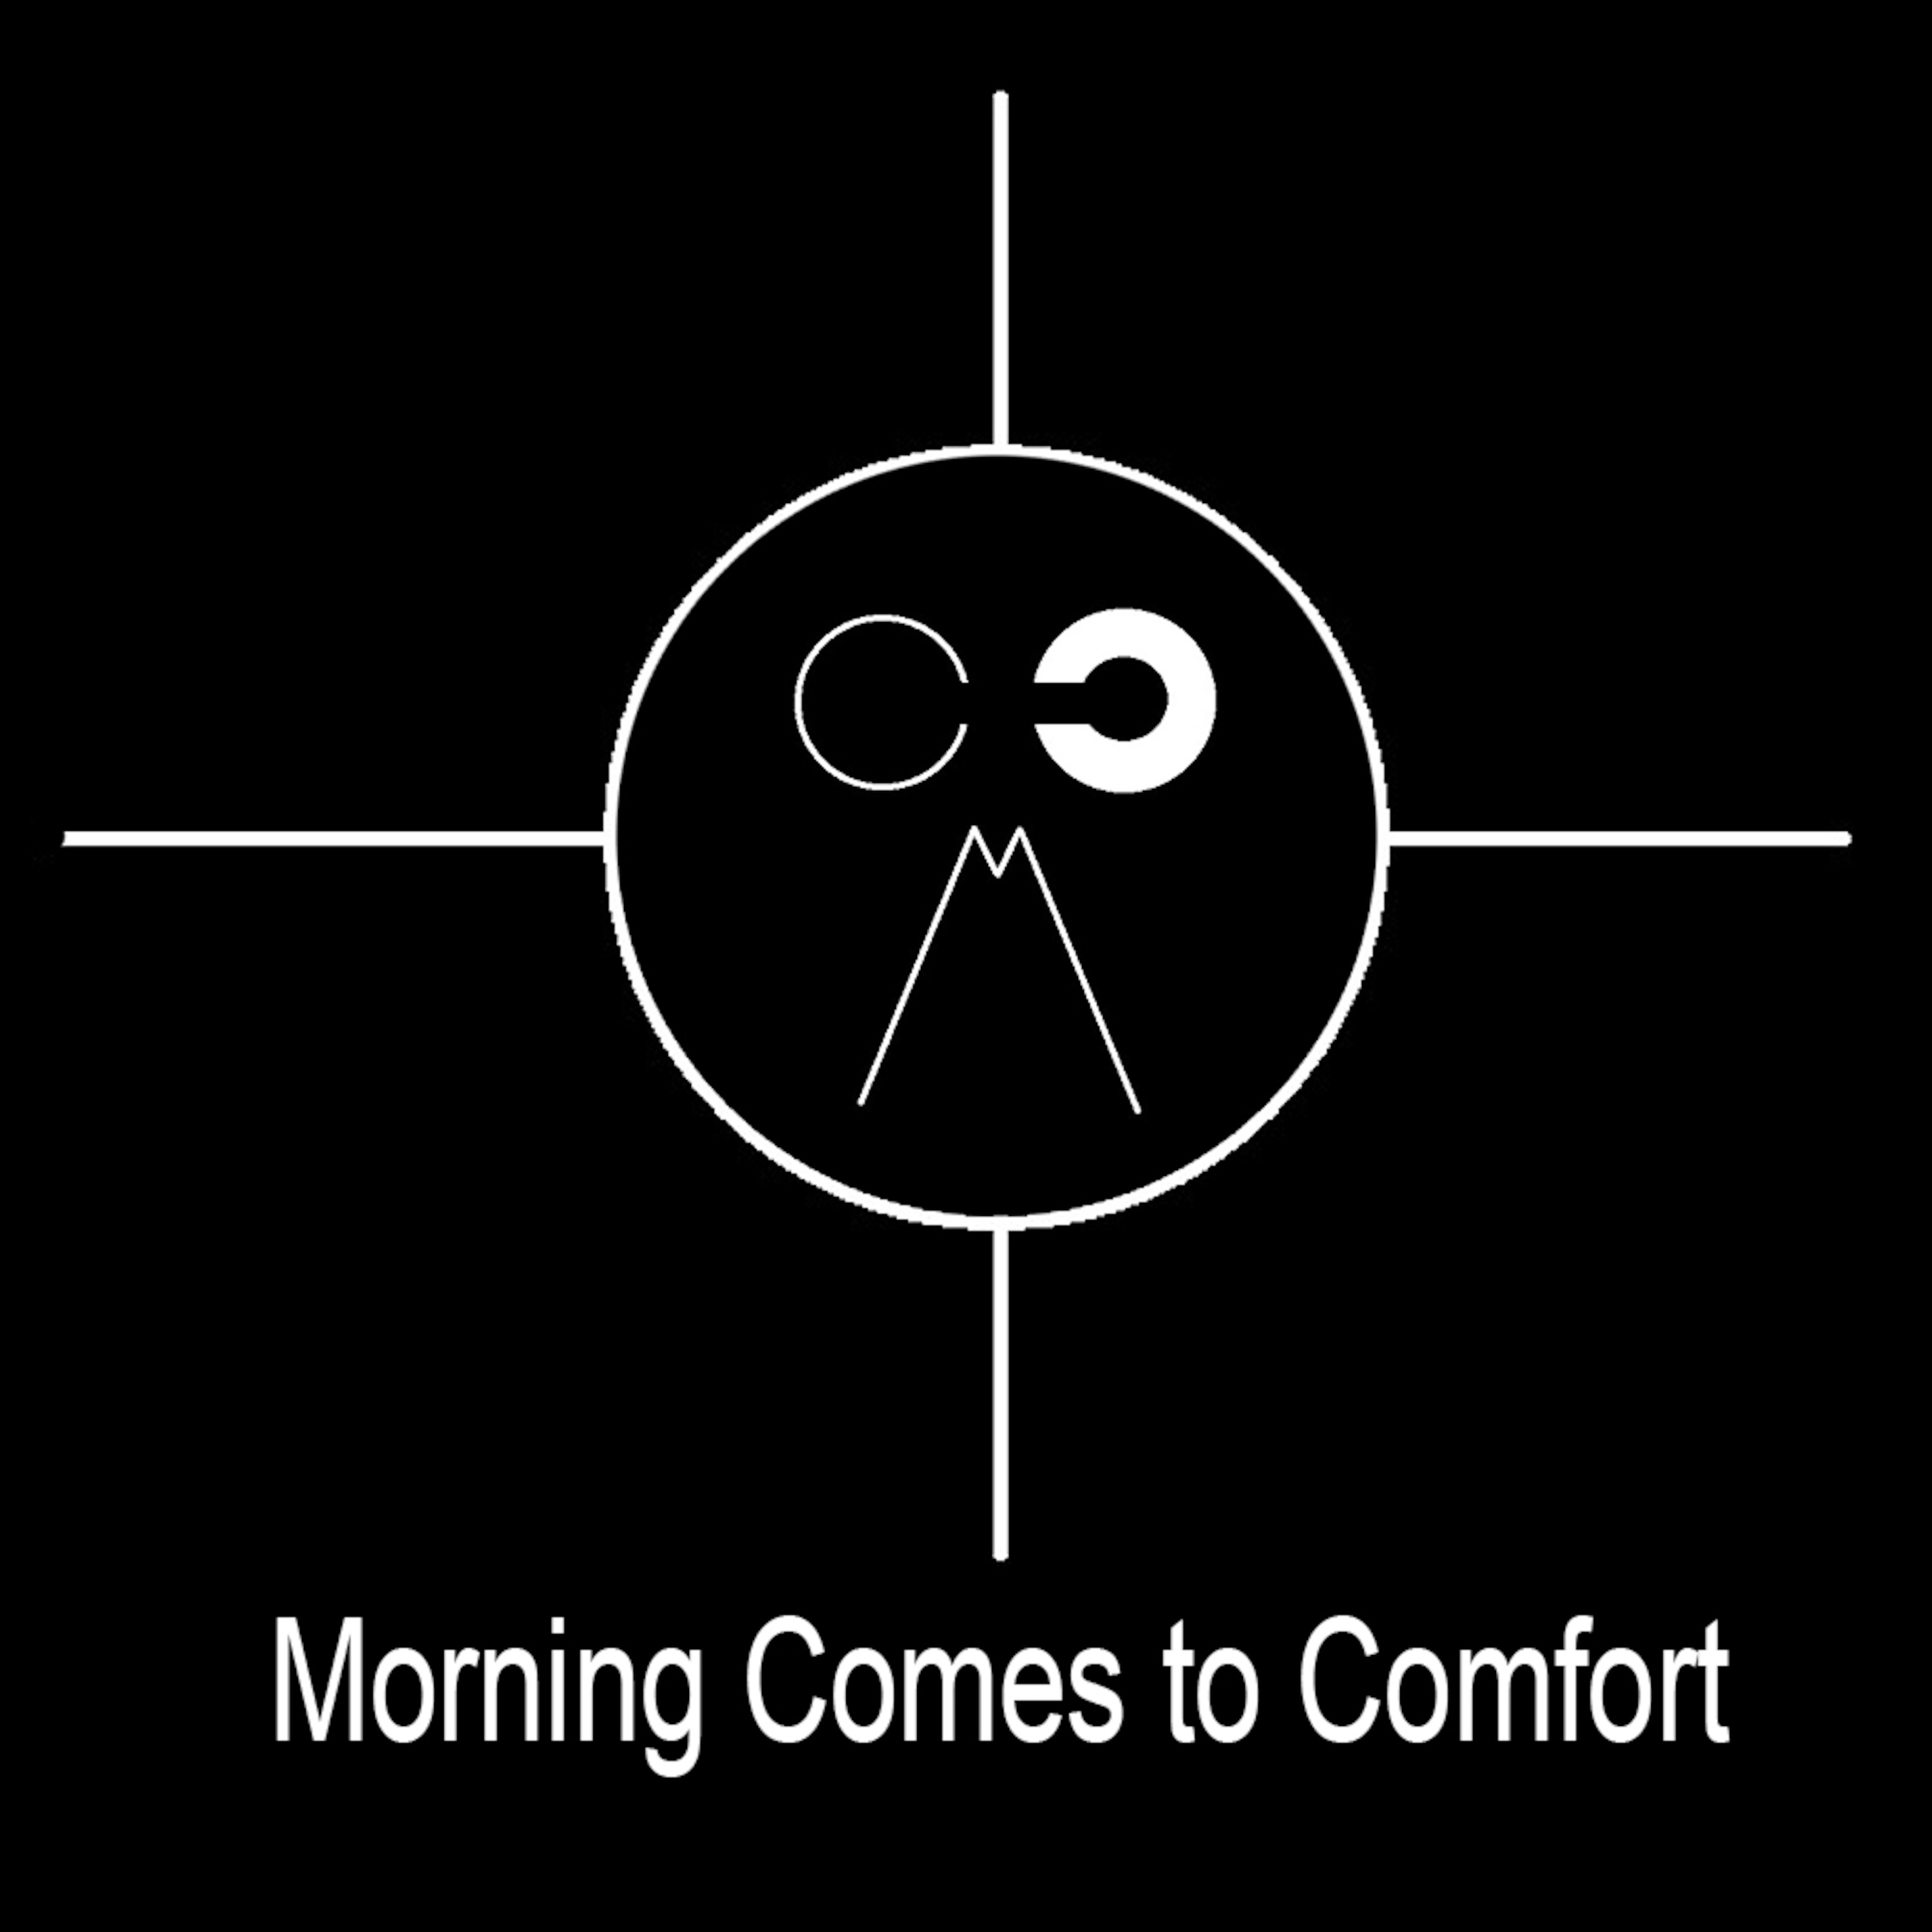 Morning Comes to Comfort